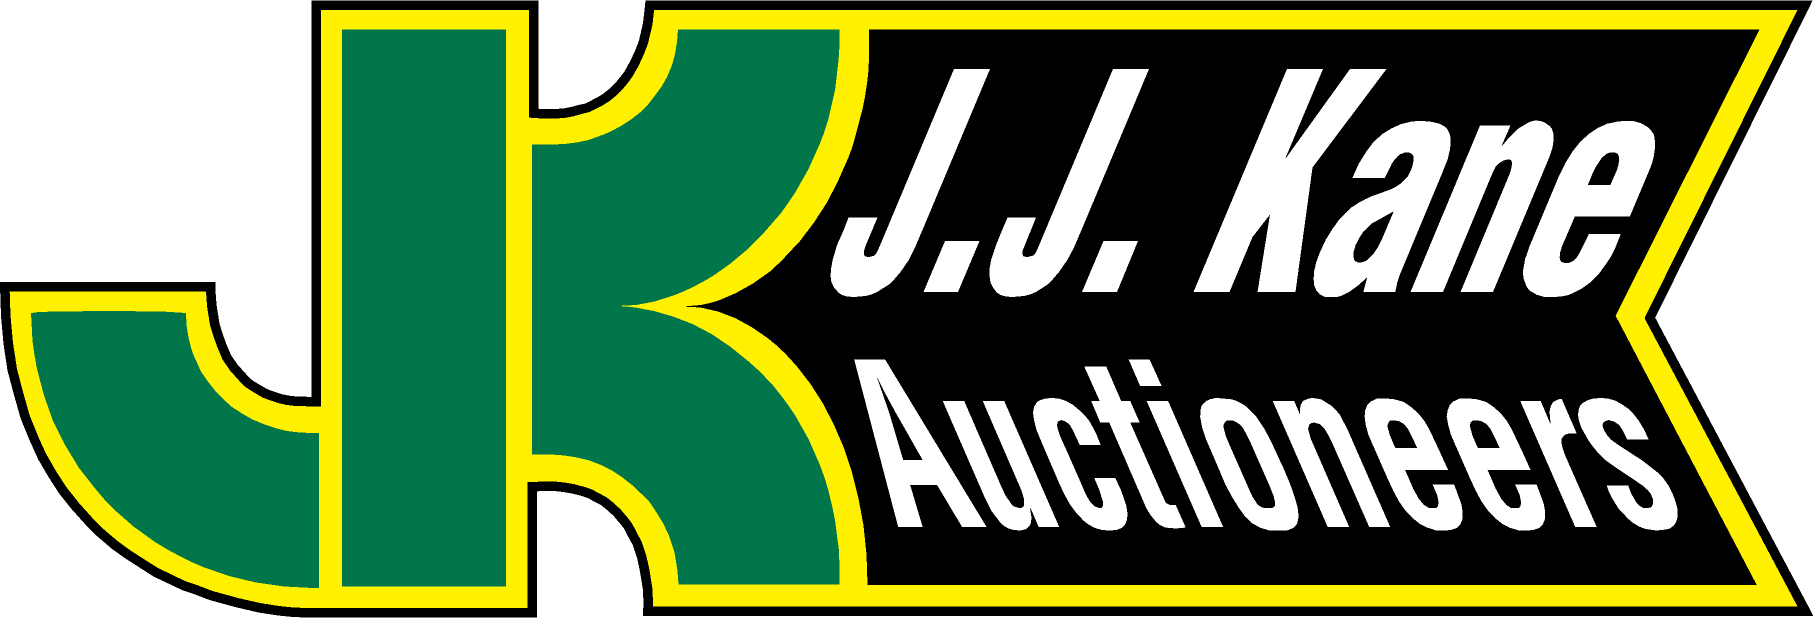 What are some of the larger public auctions in Ohio?